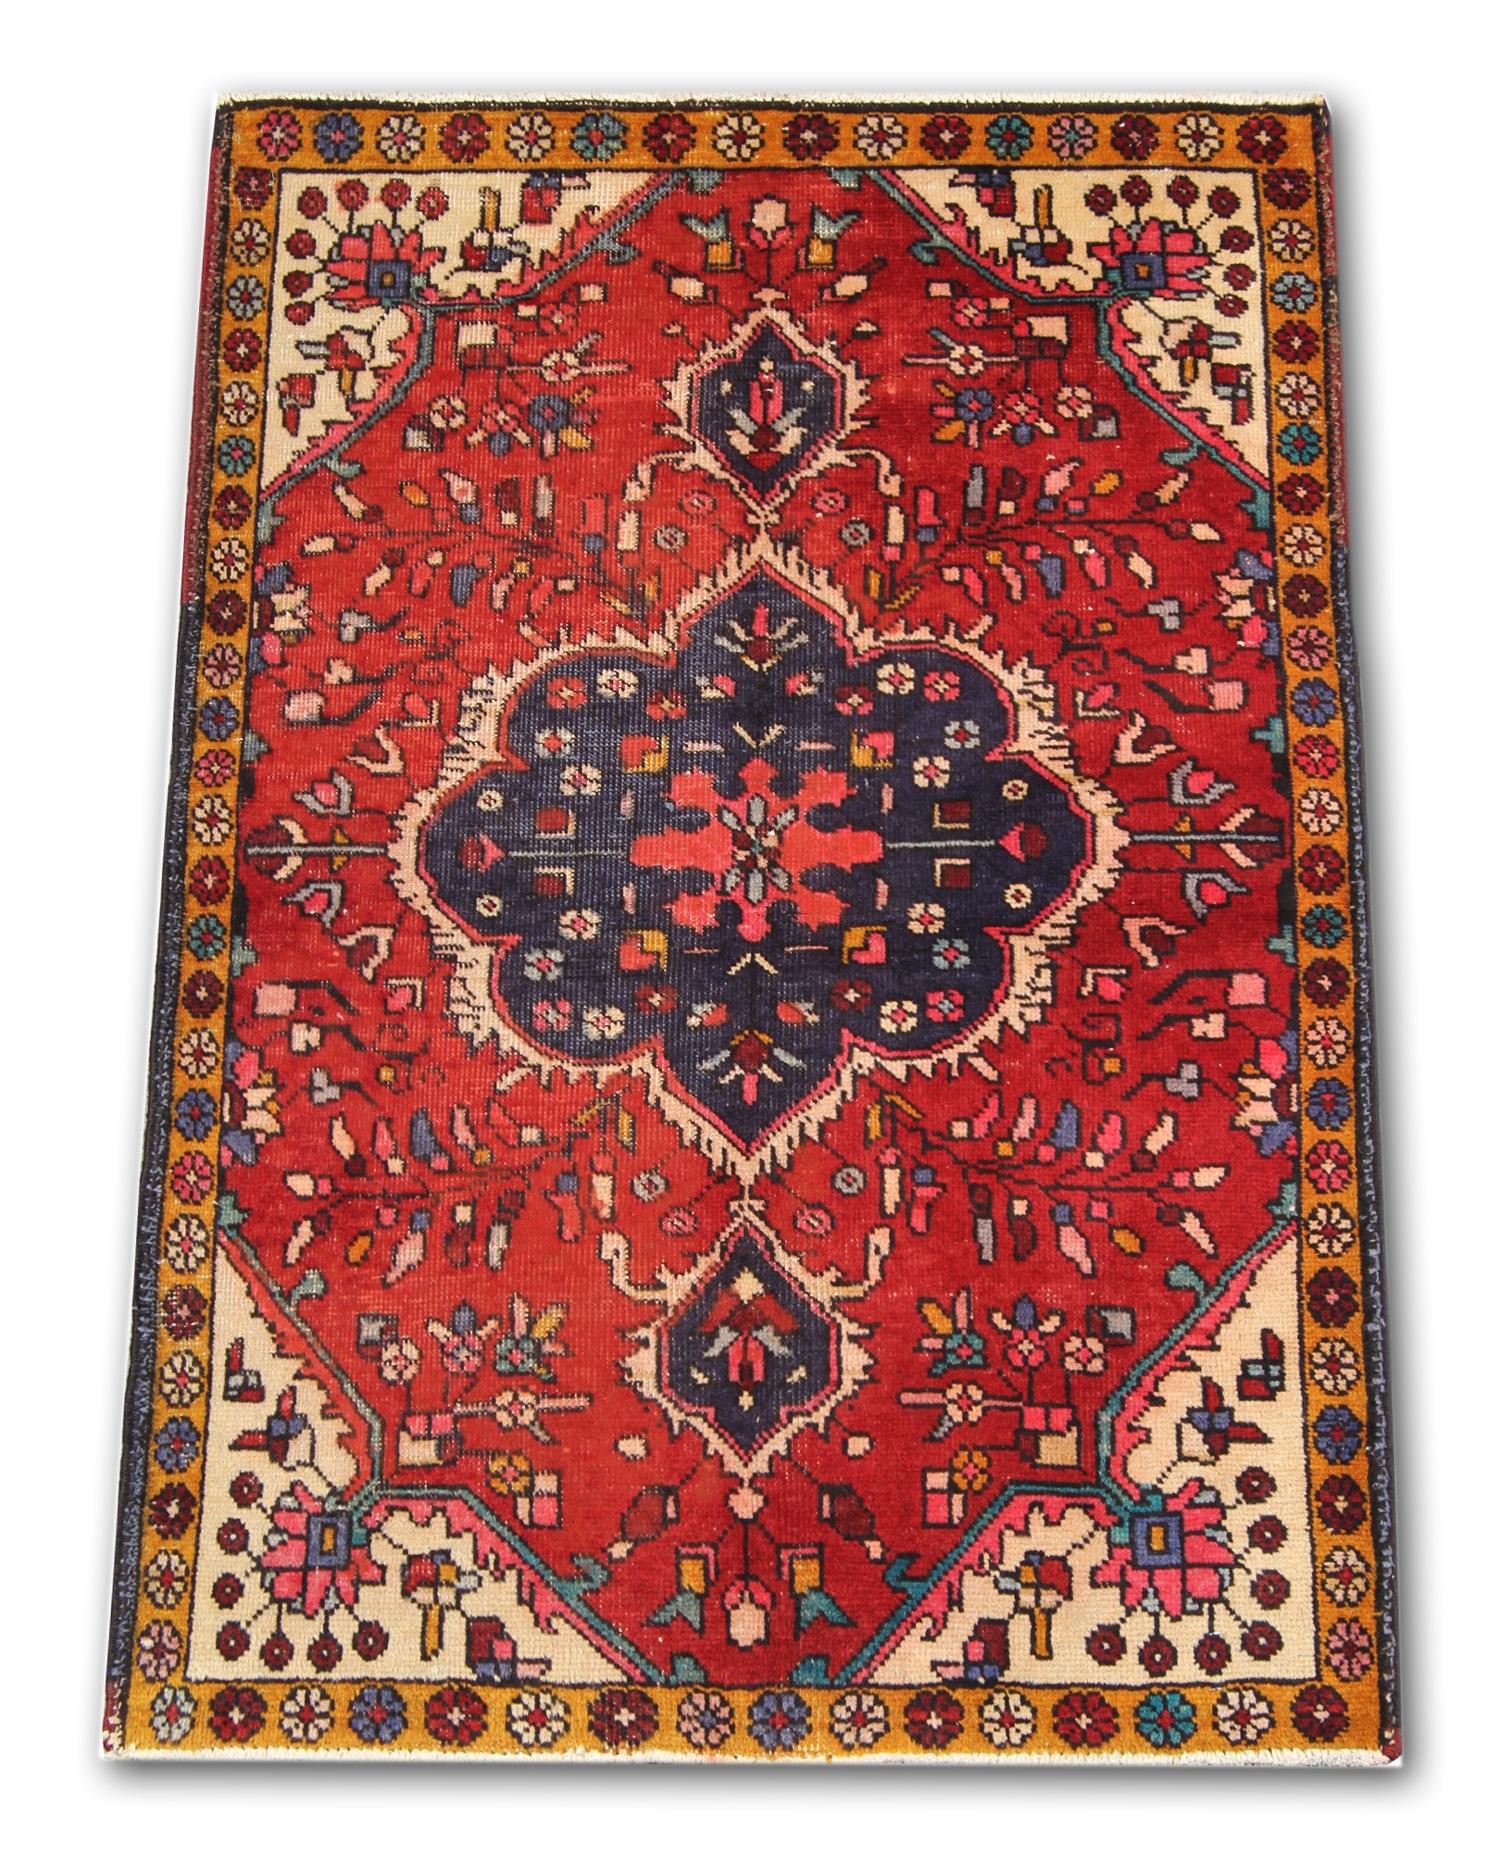 This elegant piece was woven by hand and featured a rich red background with a large central medallion woven in deep blue, with a decorative surrounding design and a simple border. With orange, blue and brown accents. Easily style this piece with